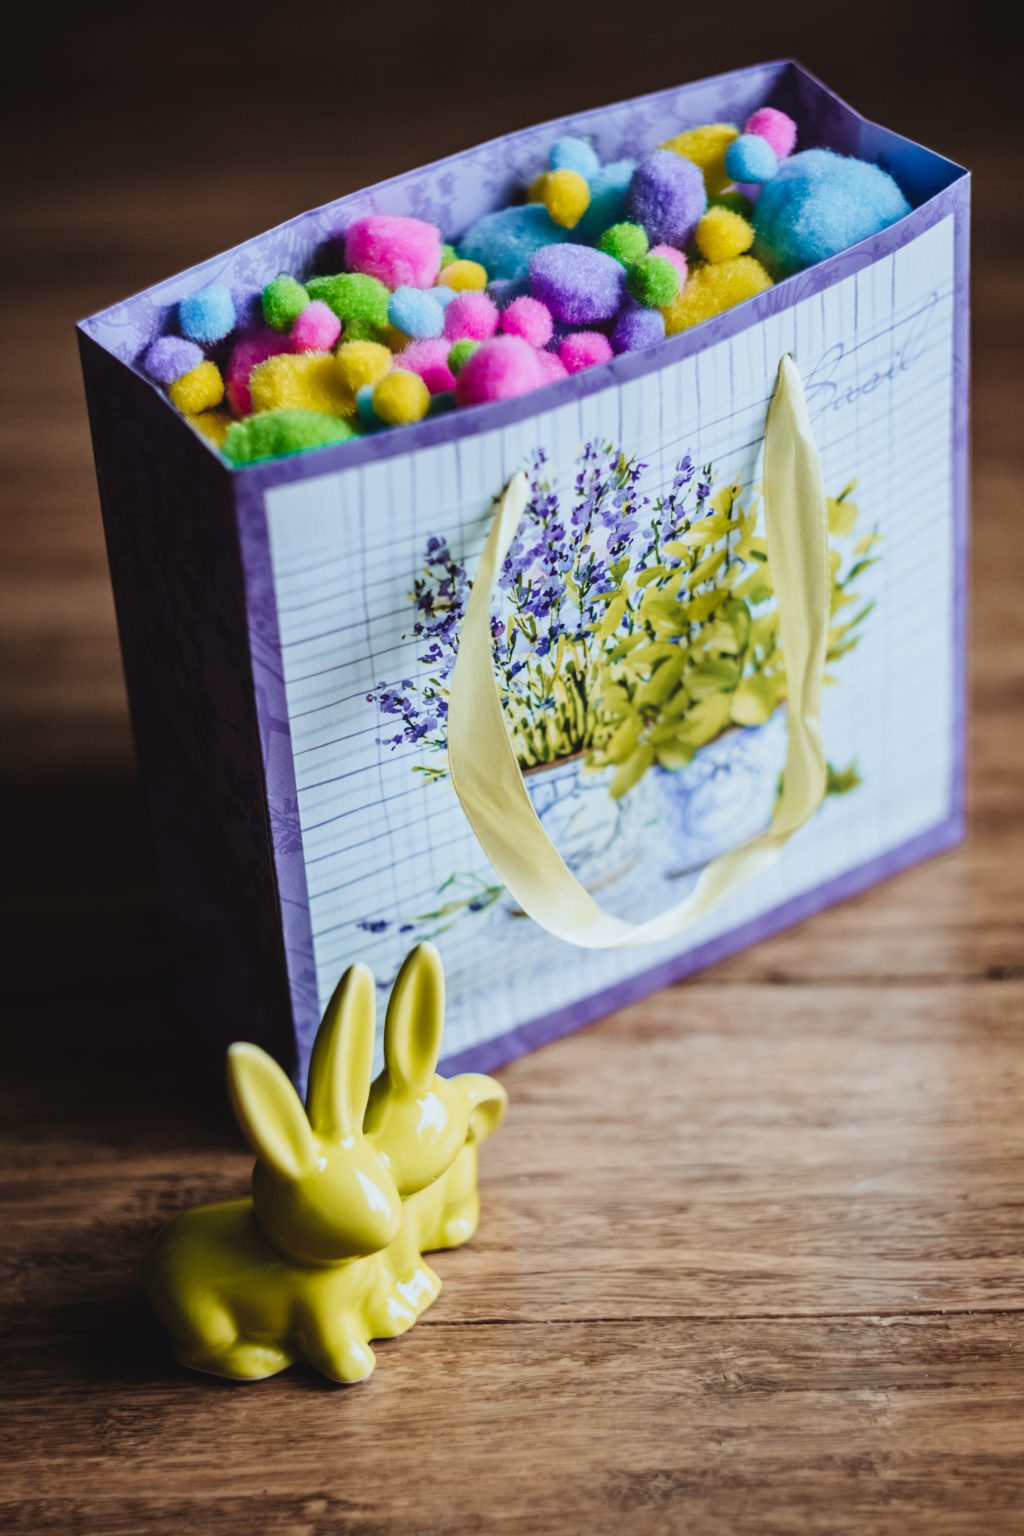 Easter bunny gift 7 - free stock photo